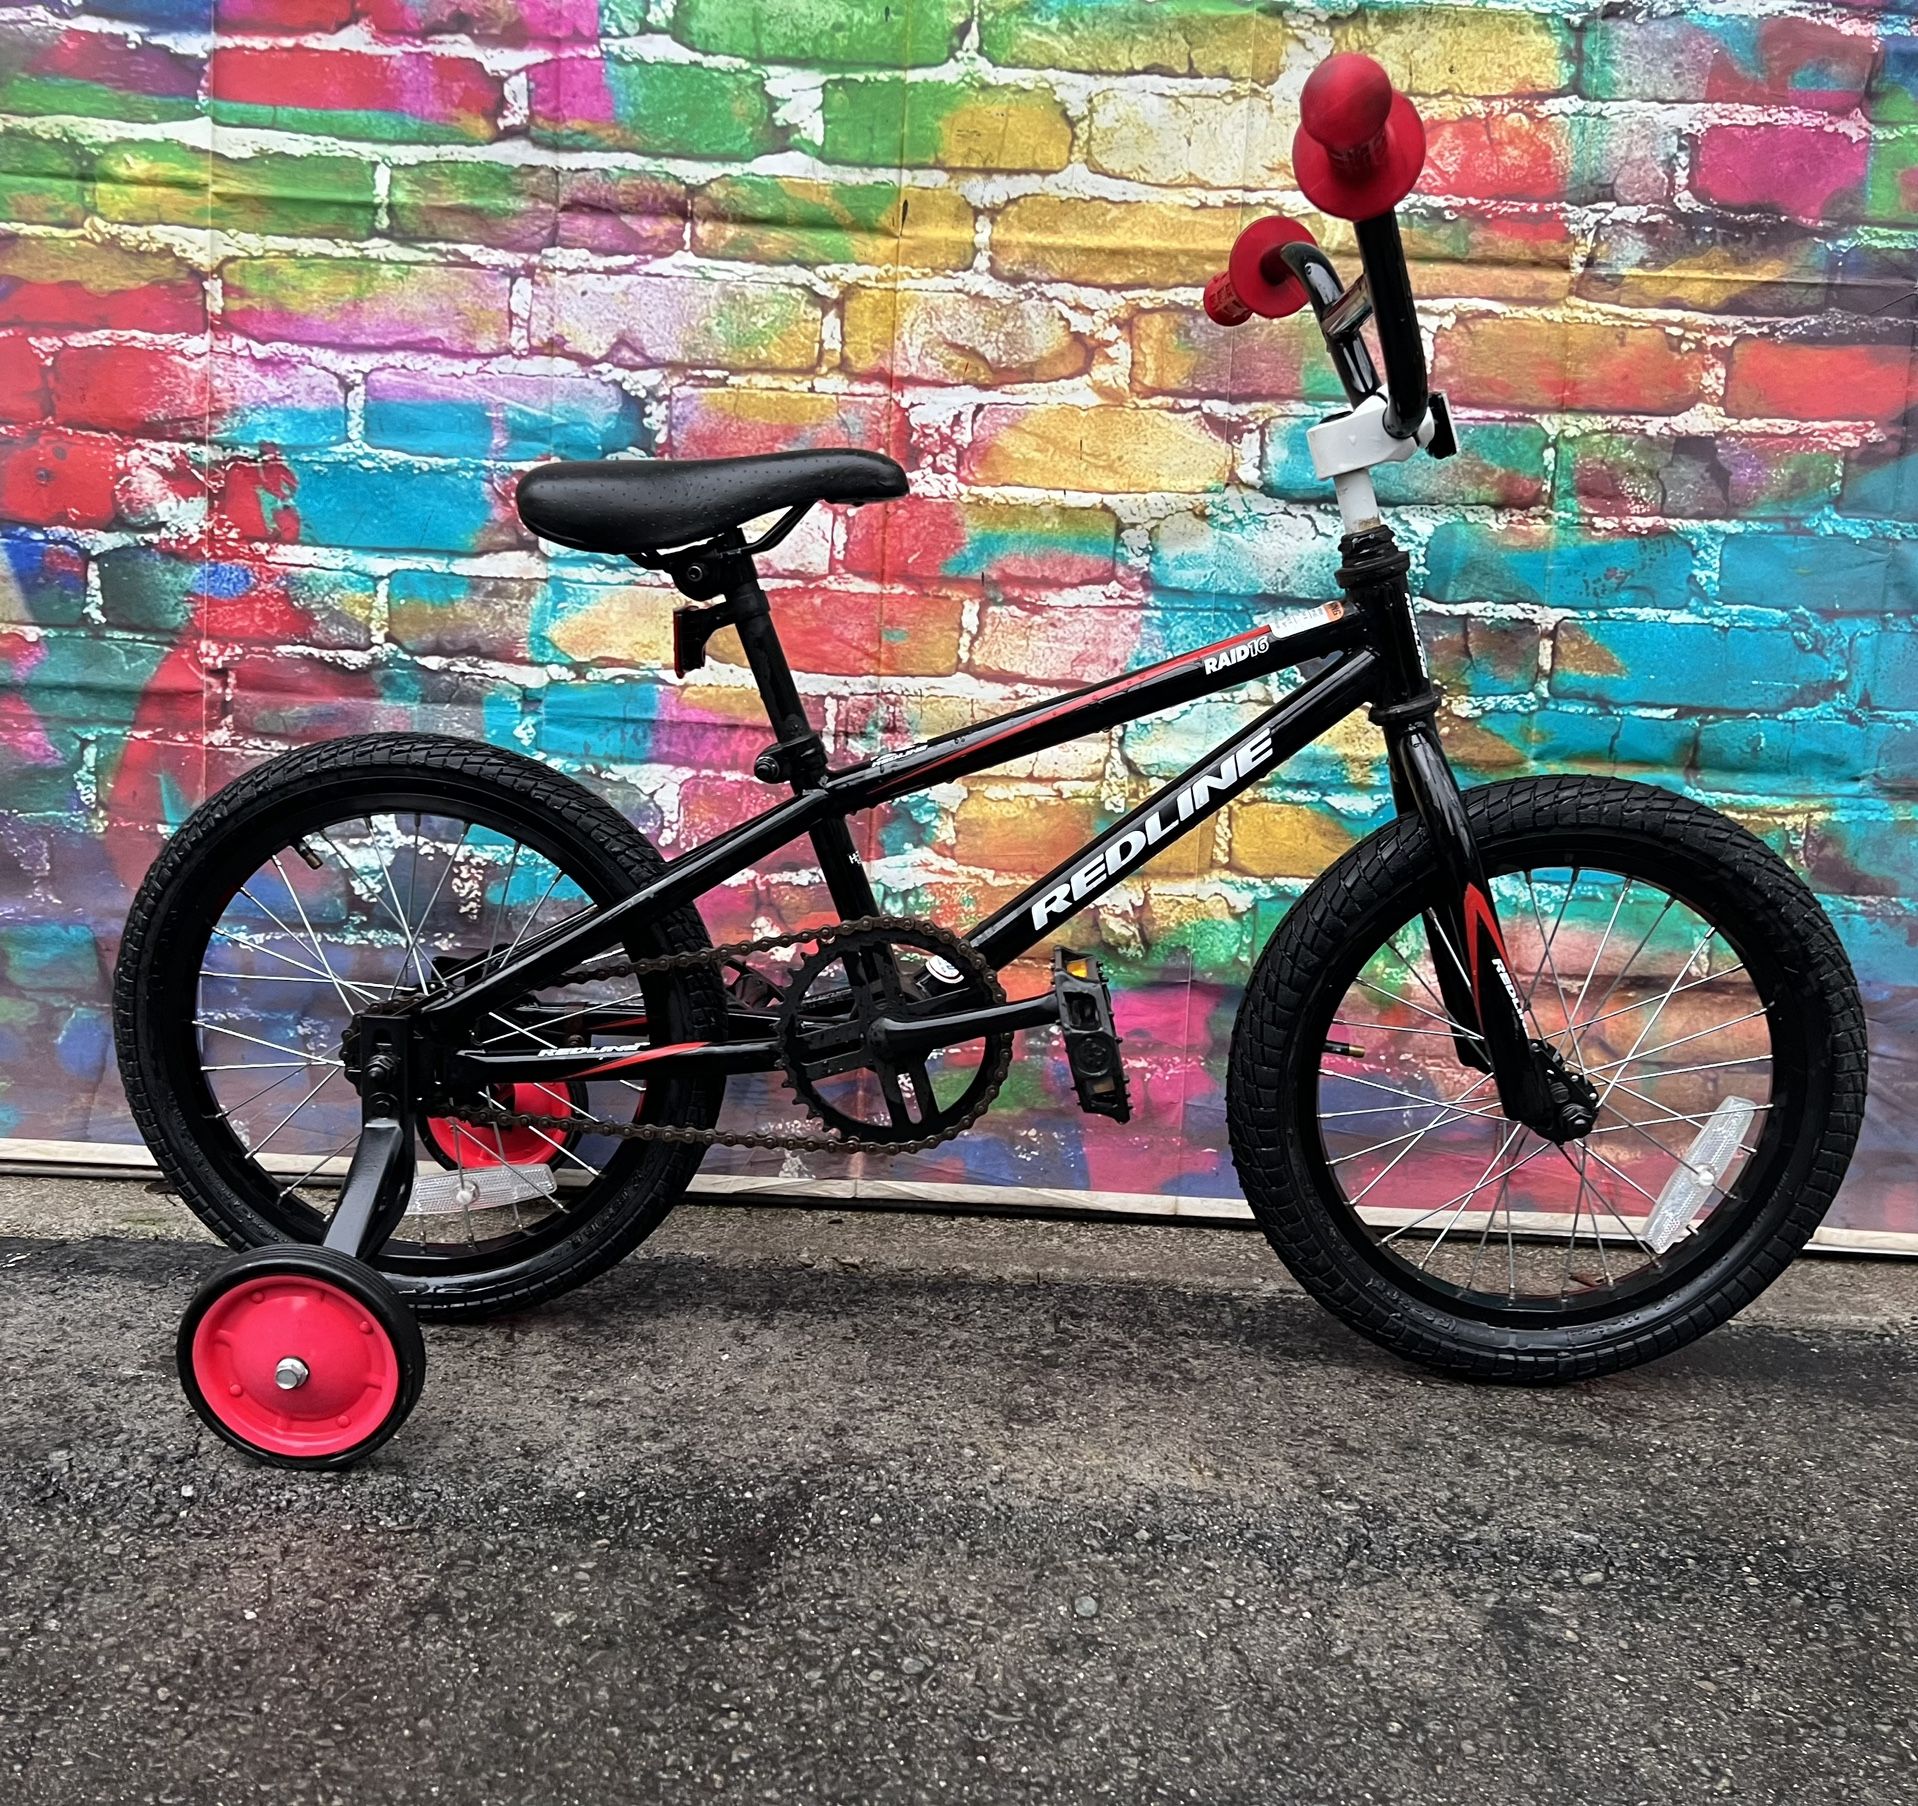 REDLINE BMX BIKE 16″ alloy rims, training wheels, coaster brake equipped perfectly for beginner learning to ride or race. Excellent like new.  $85